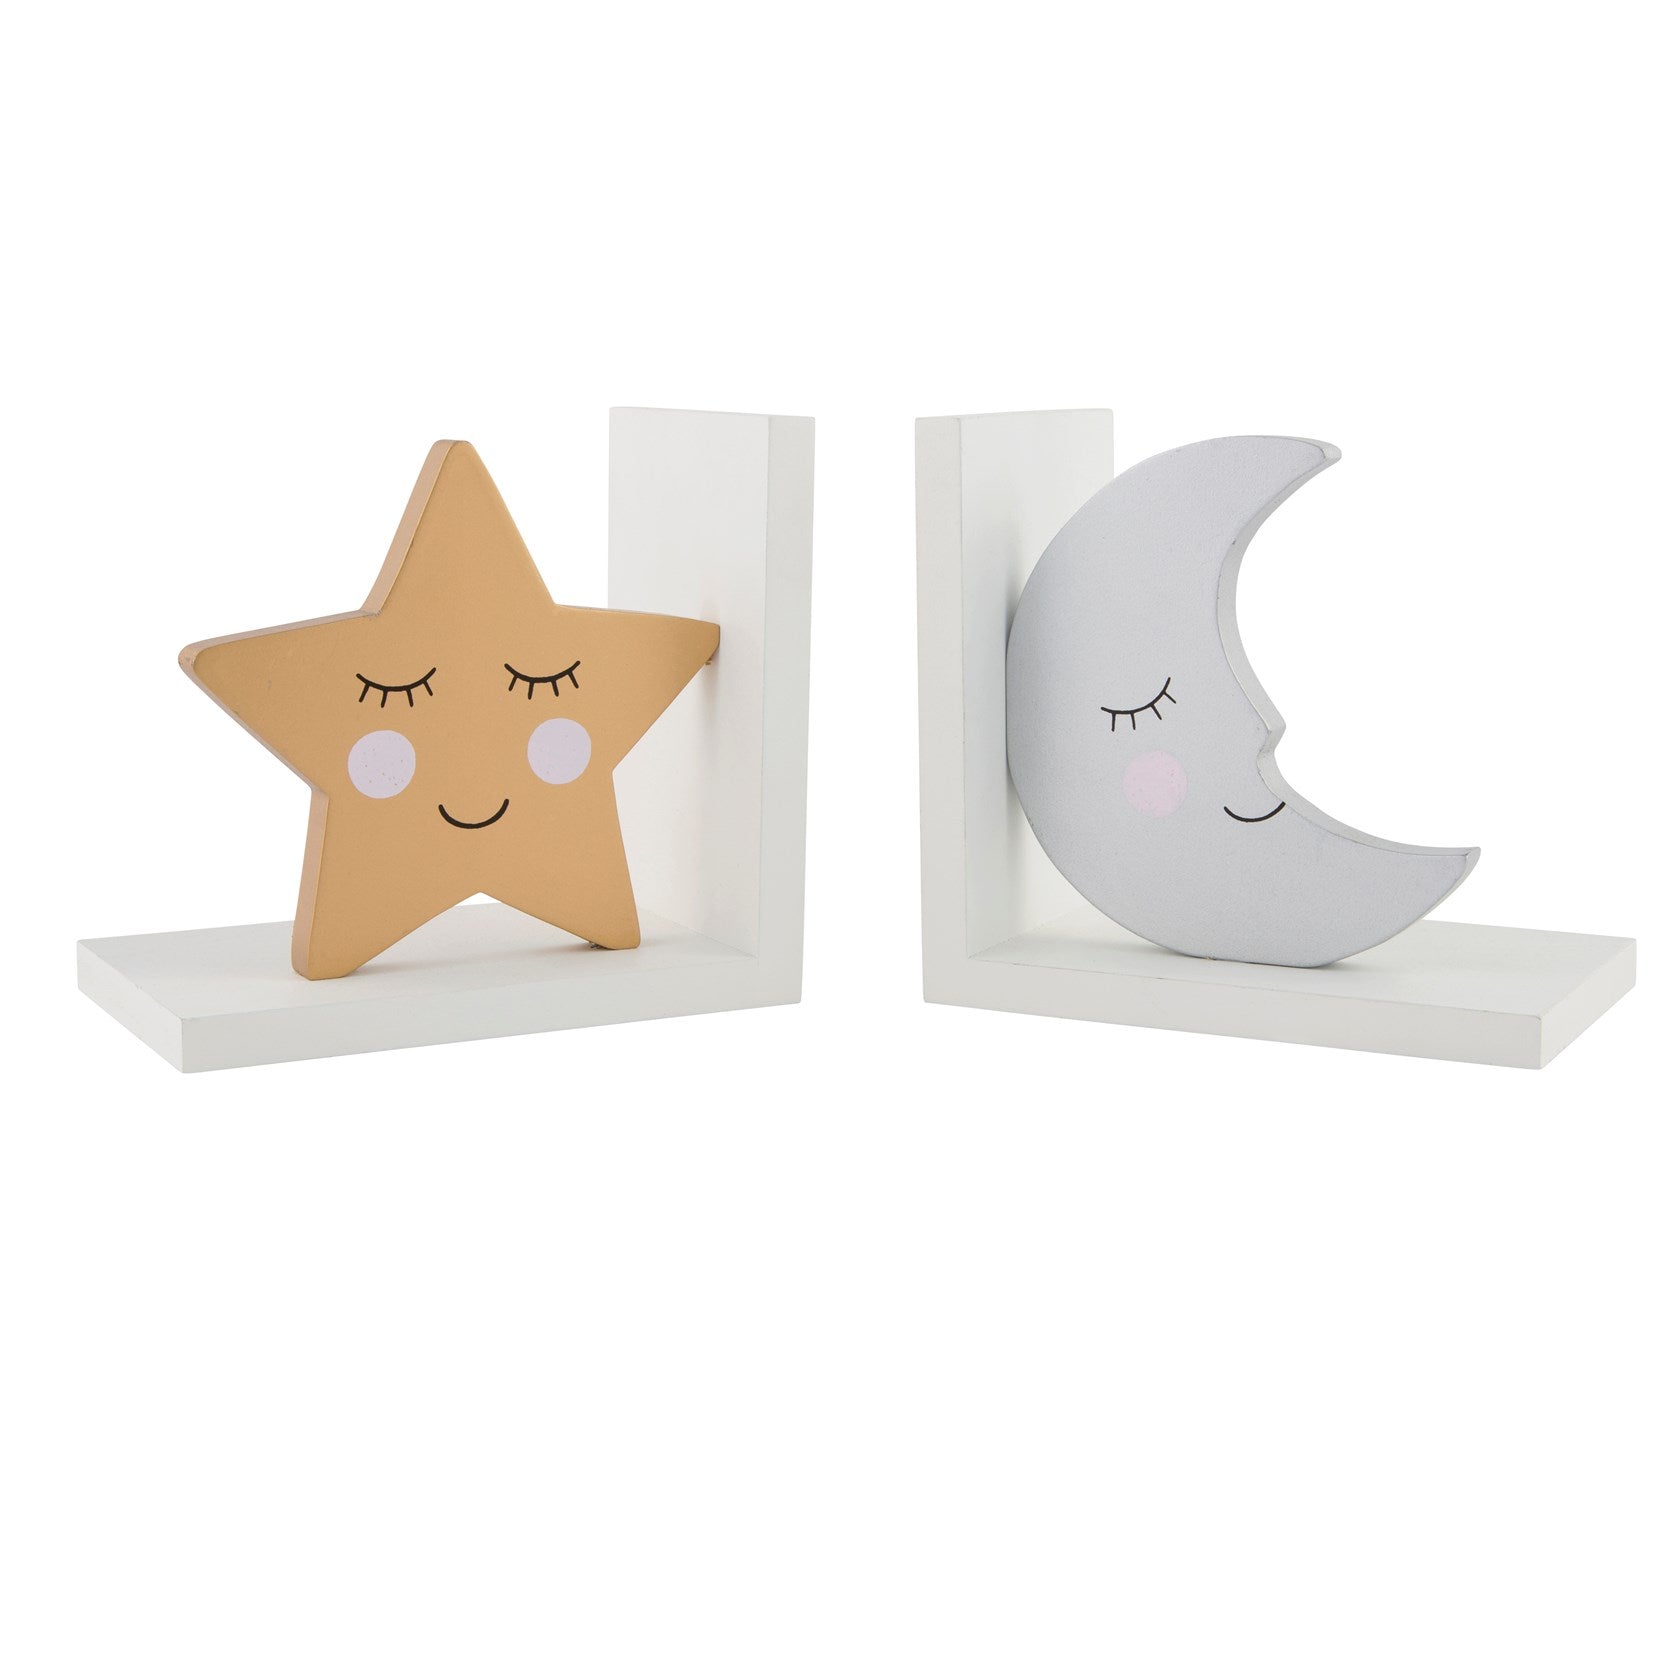 Star and Moon Bookends on a white background